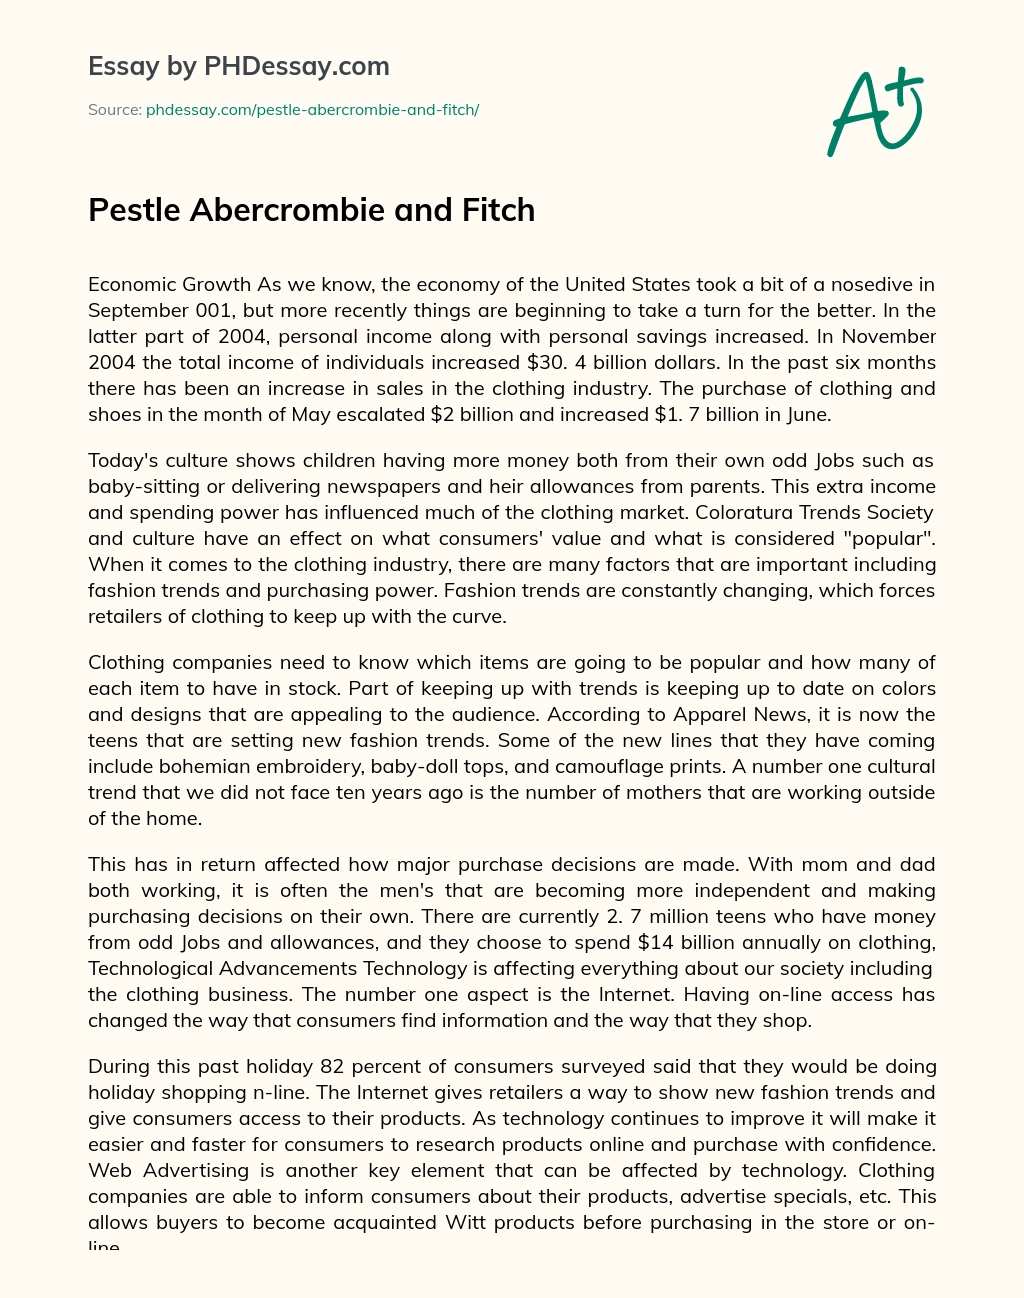 Pestle Abercrombie and Fitch essay